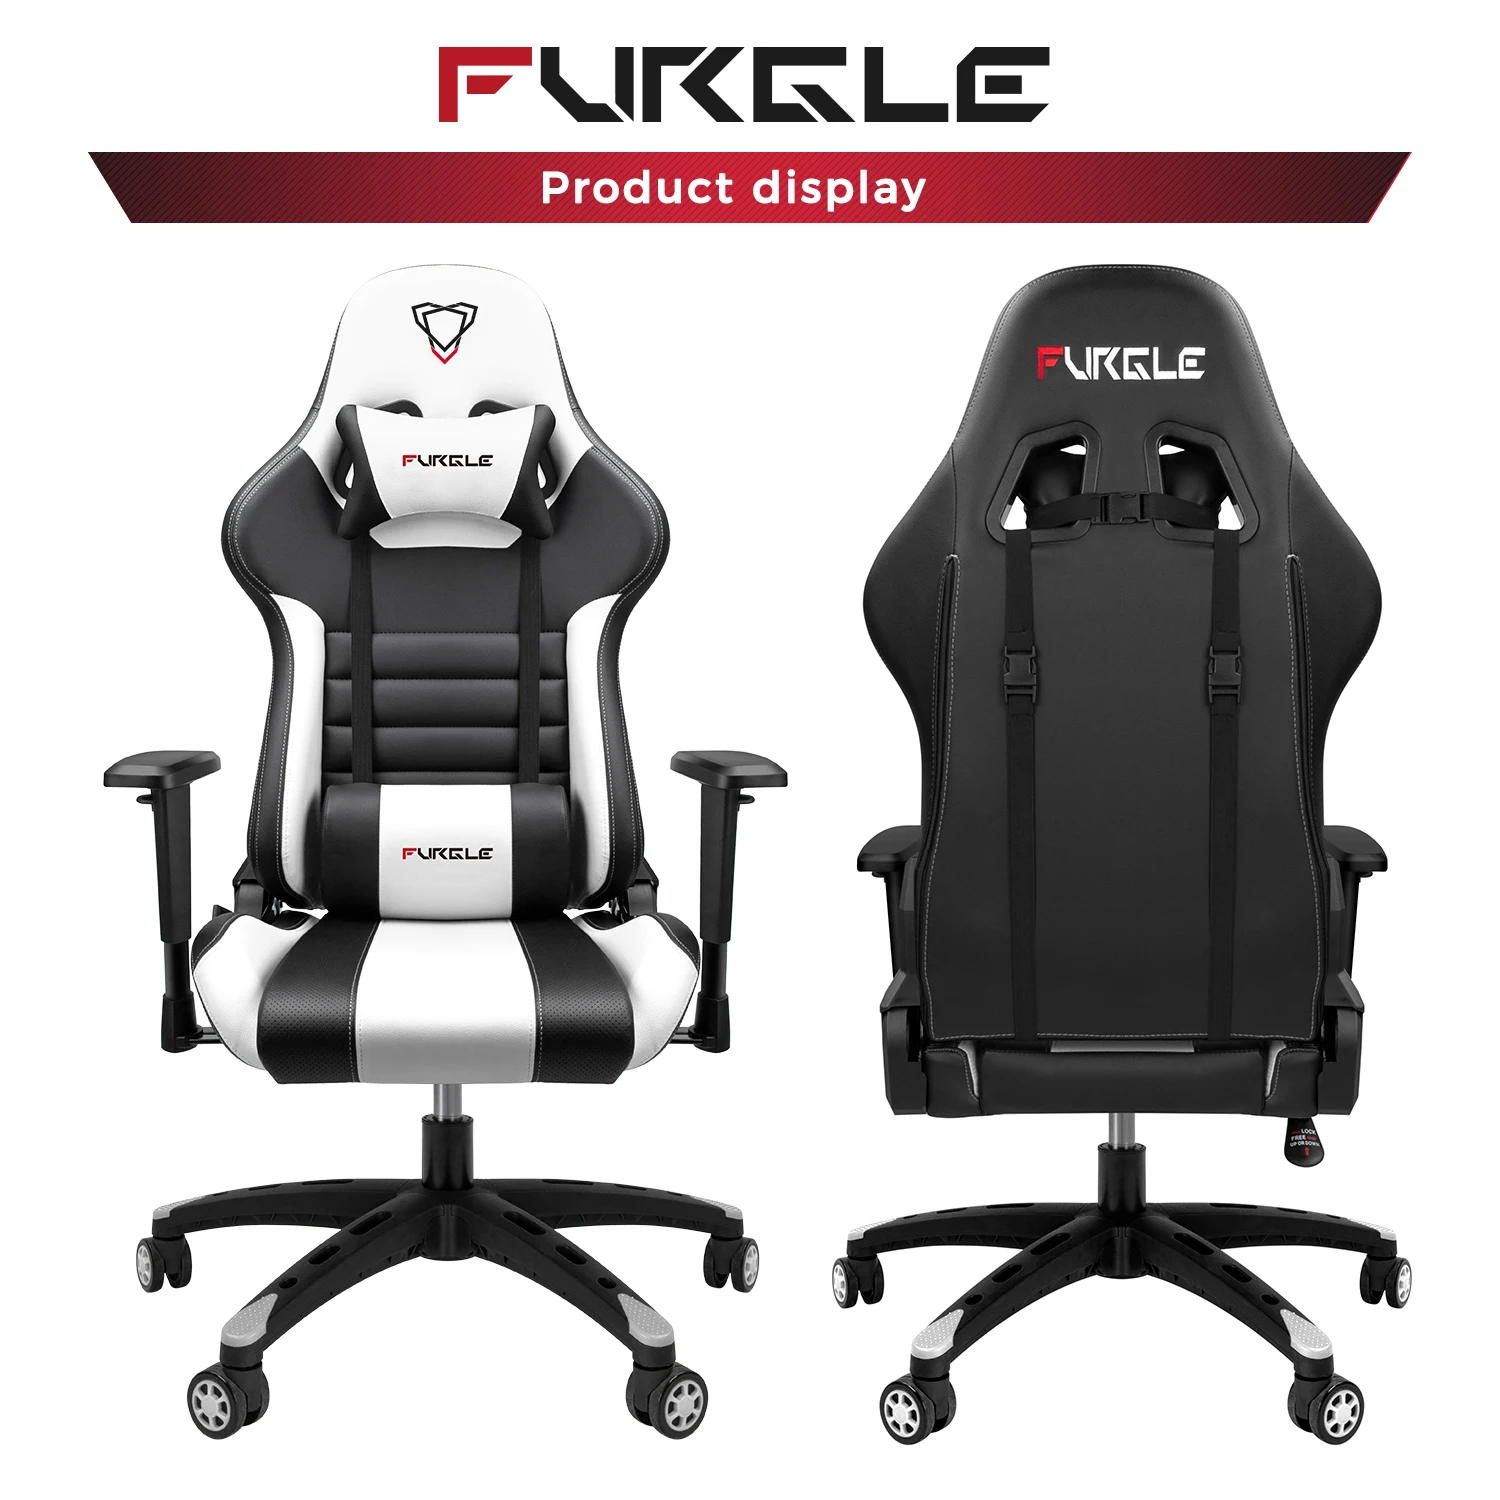 Furgle Gaming Chair White Computer Chair With Leather Boss Chair Office Chair Furniture Wcg Game Chairs Desk Chair Racing Chair